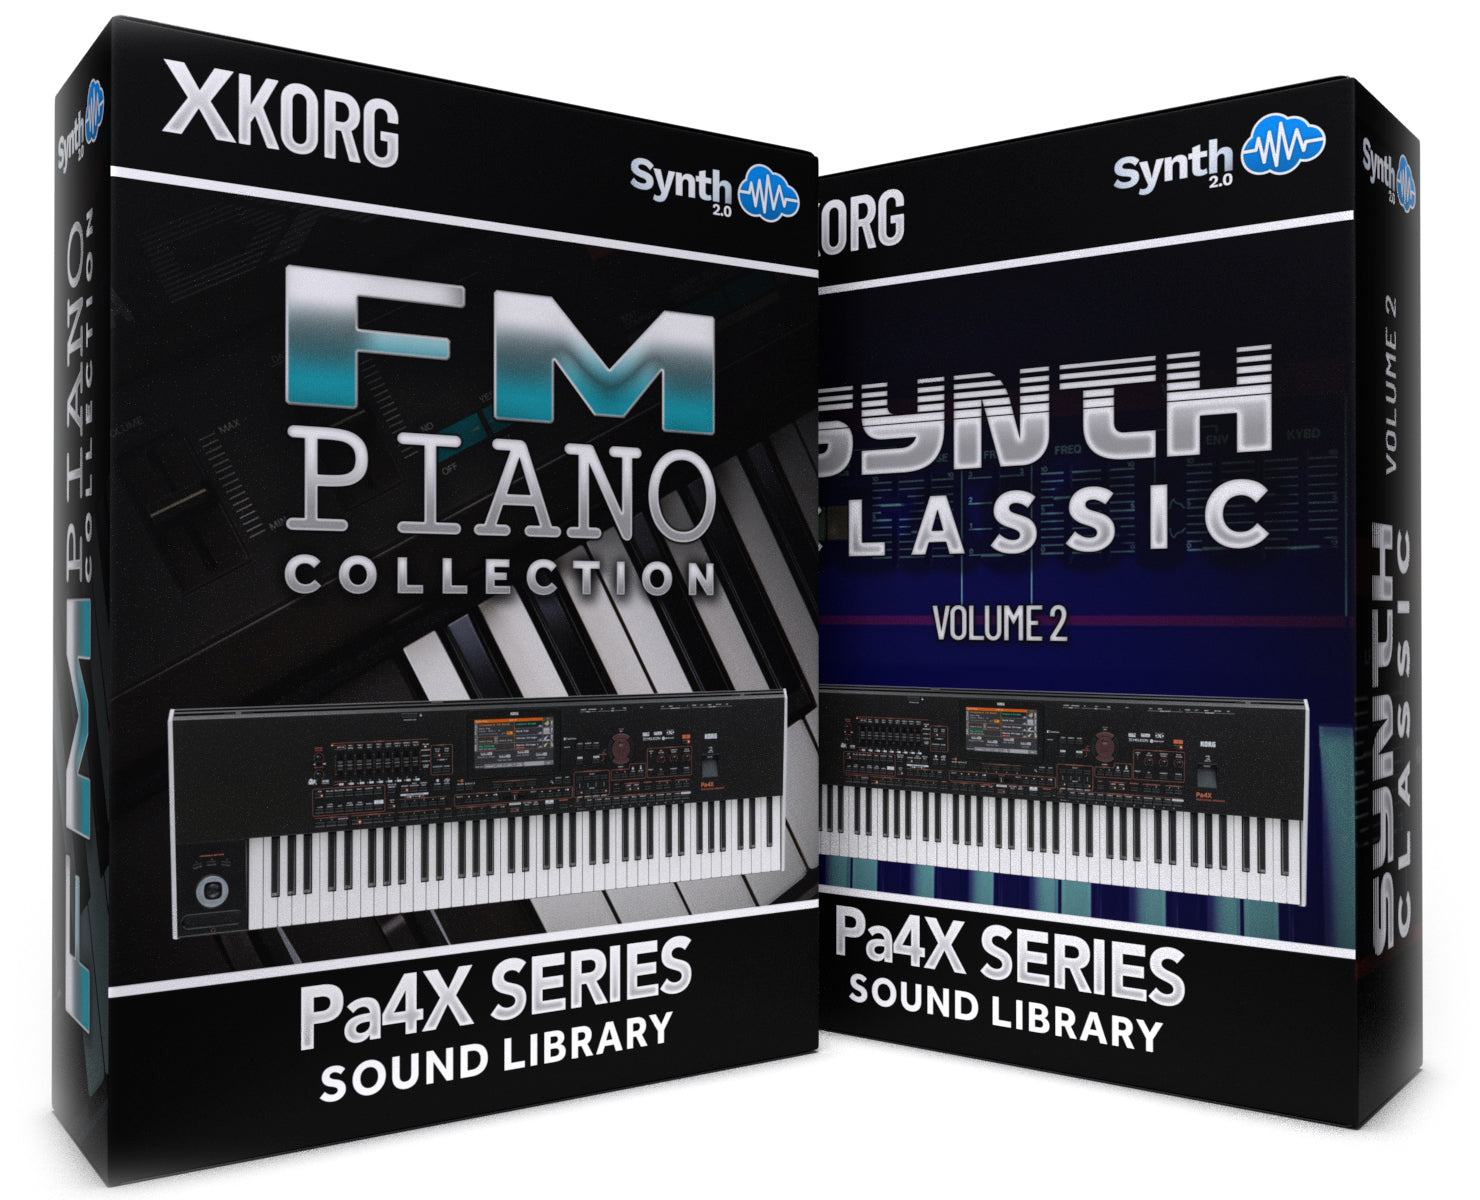 SCL107 - ( Bundle ) - FM Piano Collection + Synth Classic Vol.2 - Korg PA4x Series